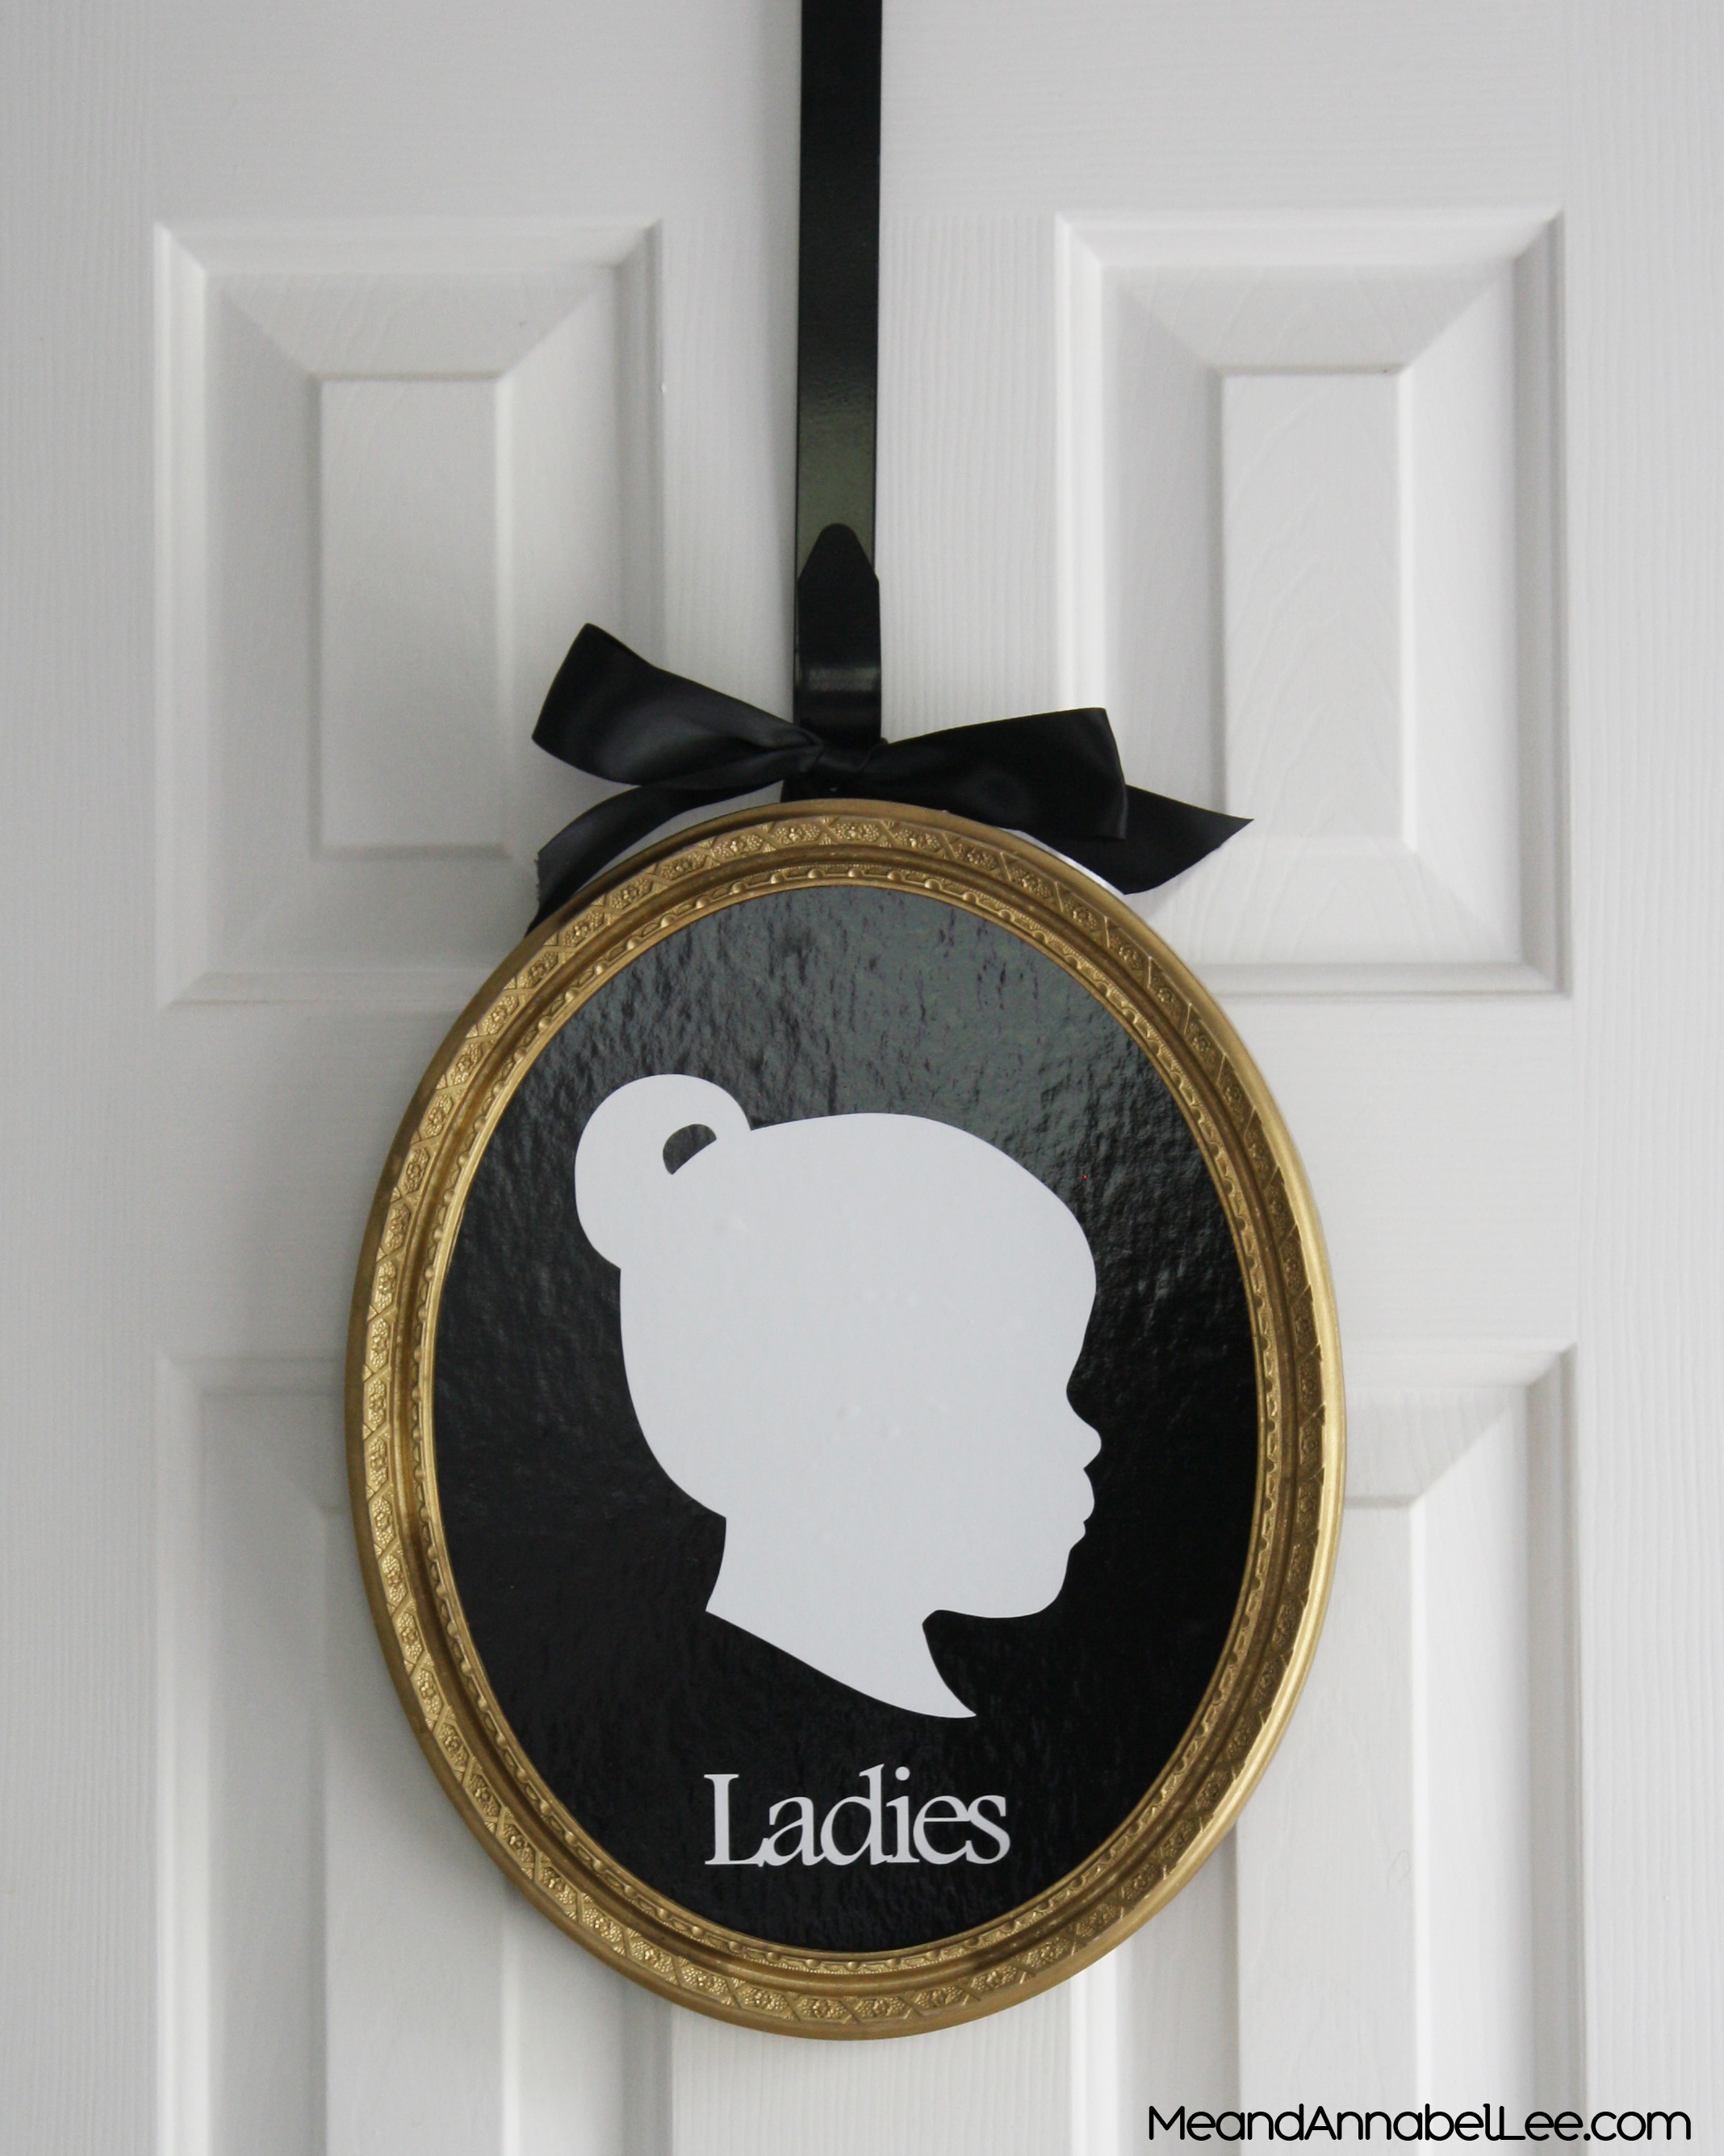 Victorian Wedding Details - Ladies & Gents Victorian Cameo Silhouette Bathroom Signs - Goth It Yourself - Vintage Gothic - Black & White & Gold Wedding Planning